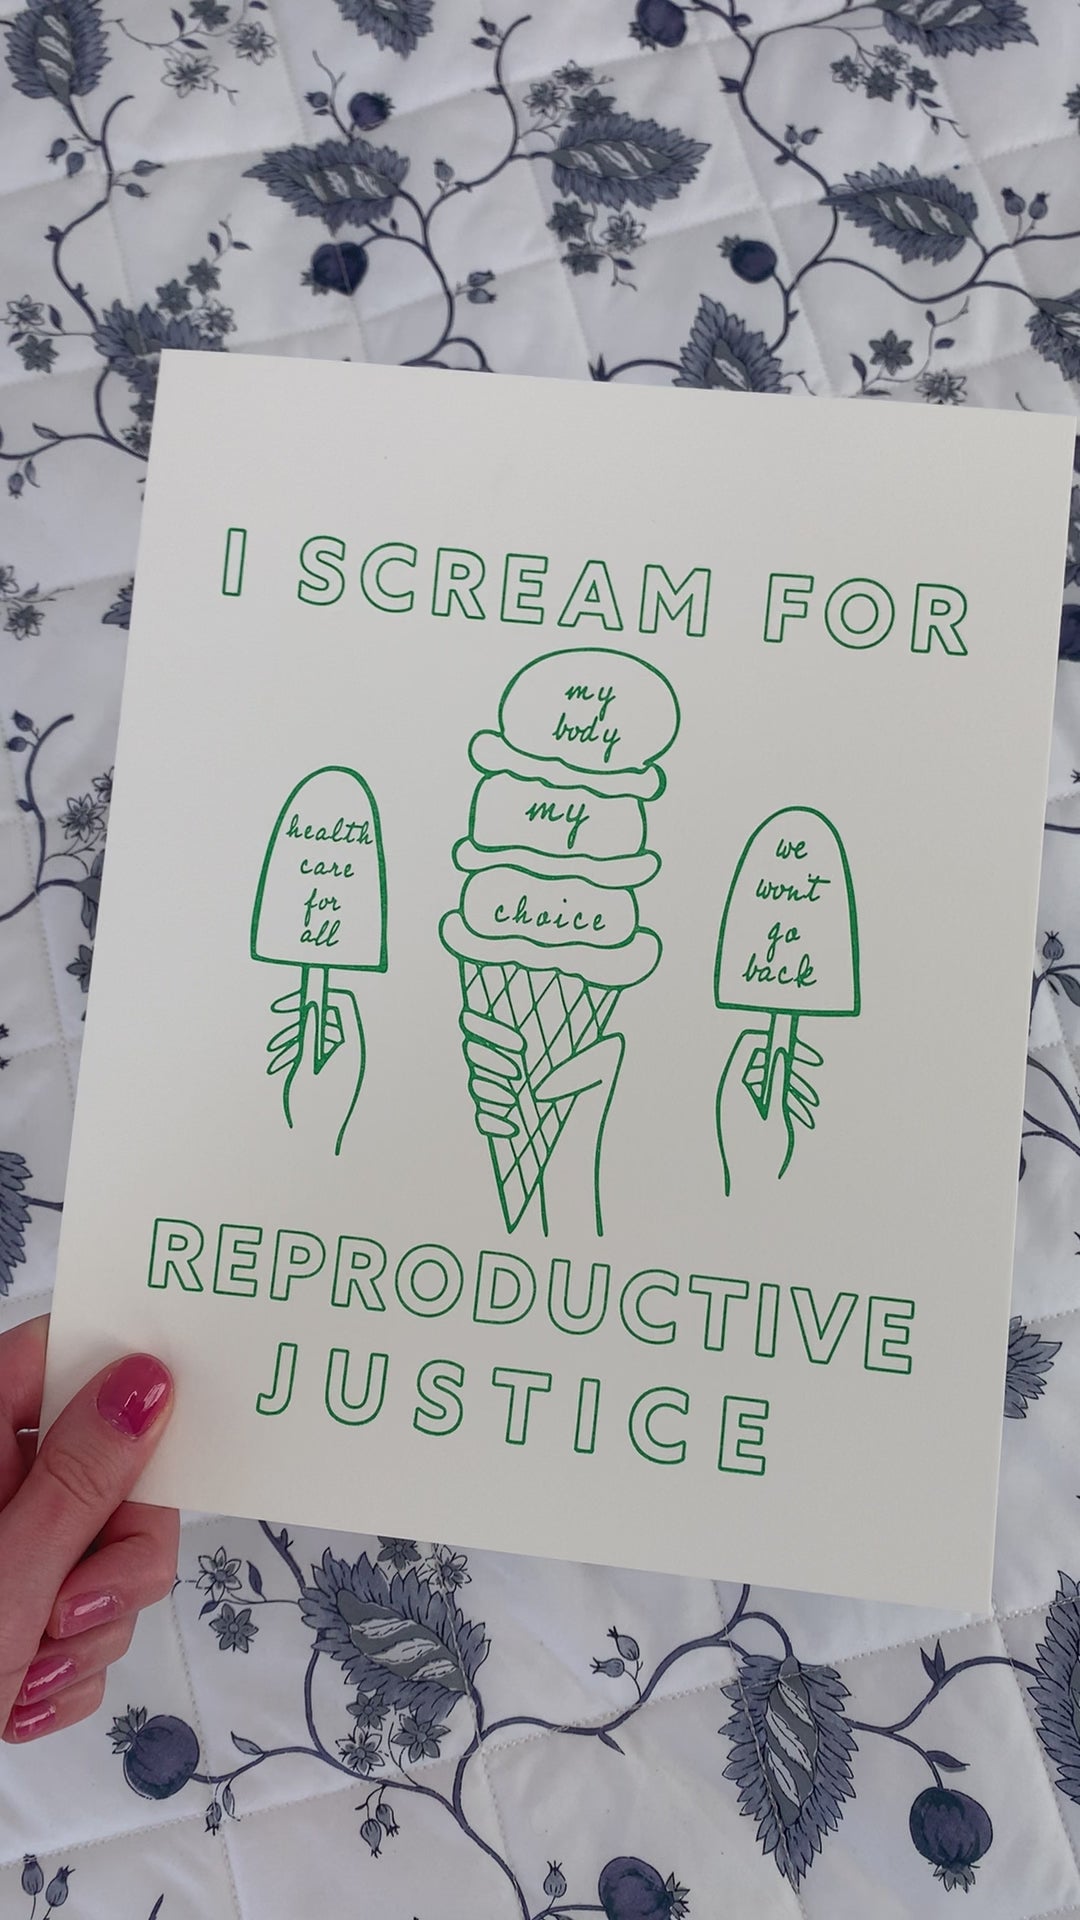 An art print that reads "I Scream for reproductive justice" with ice cream designs in a mint green color